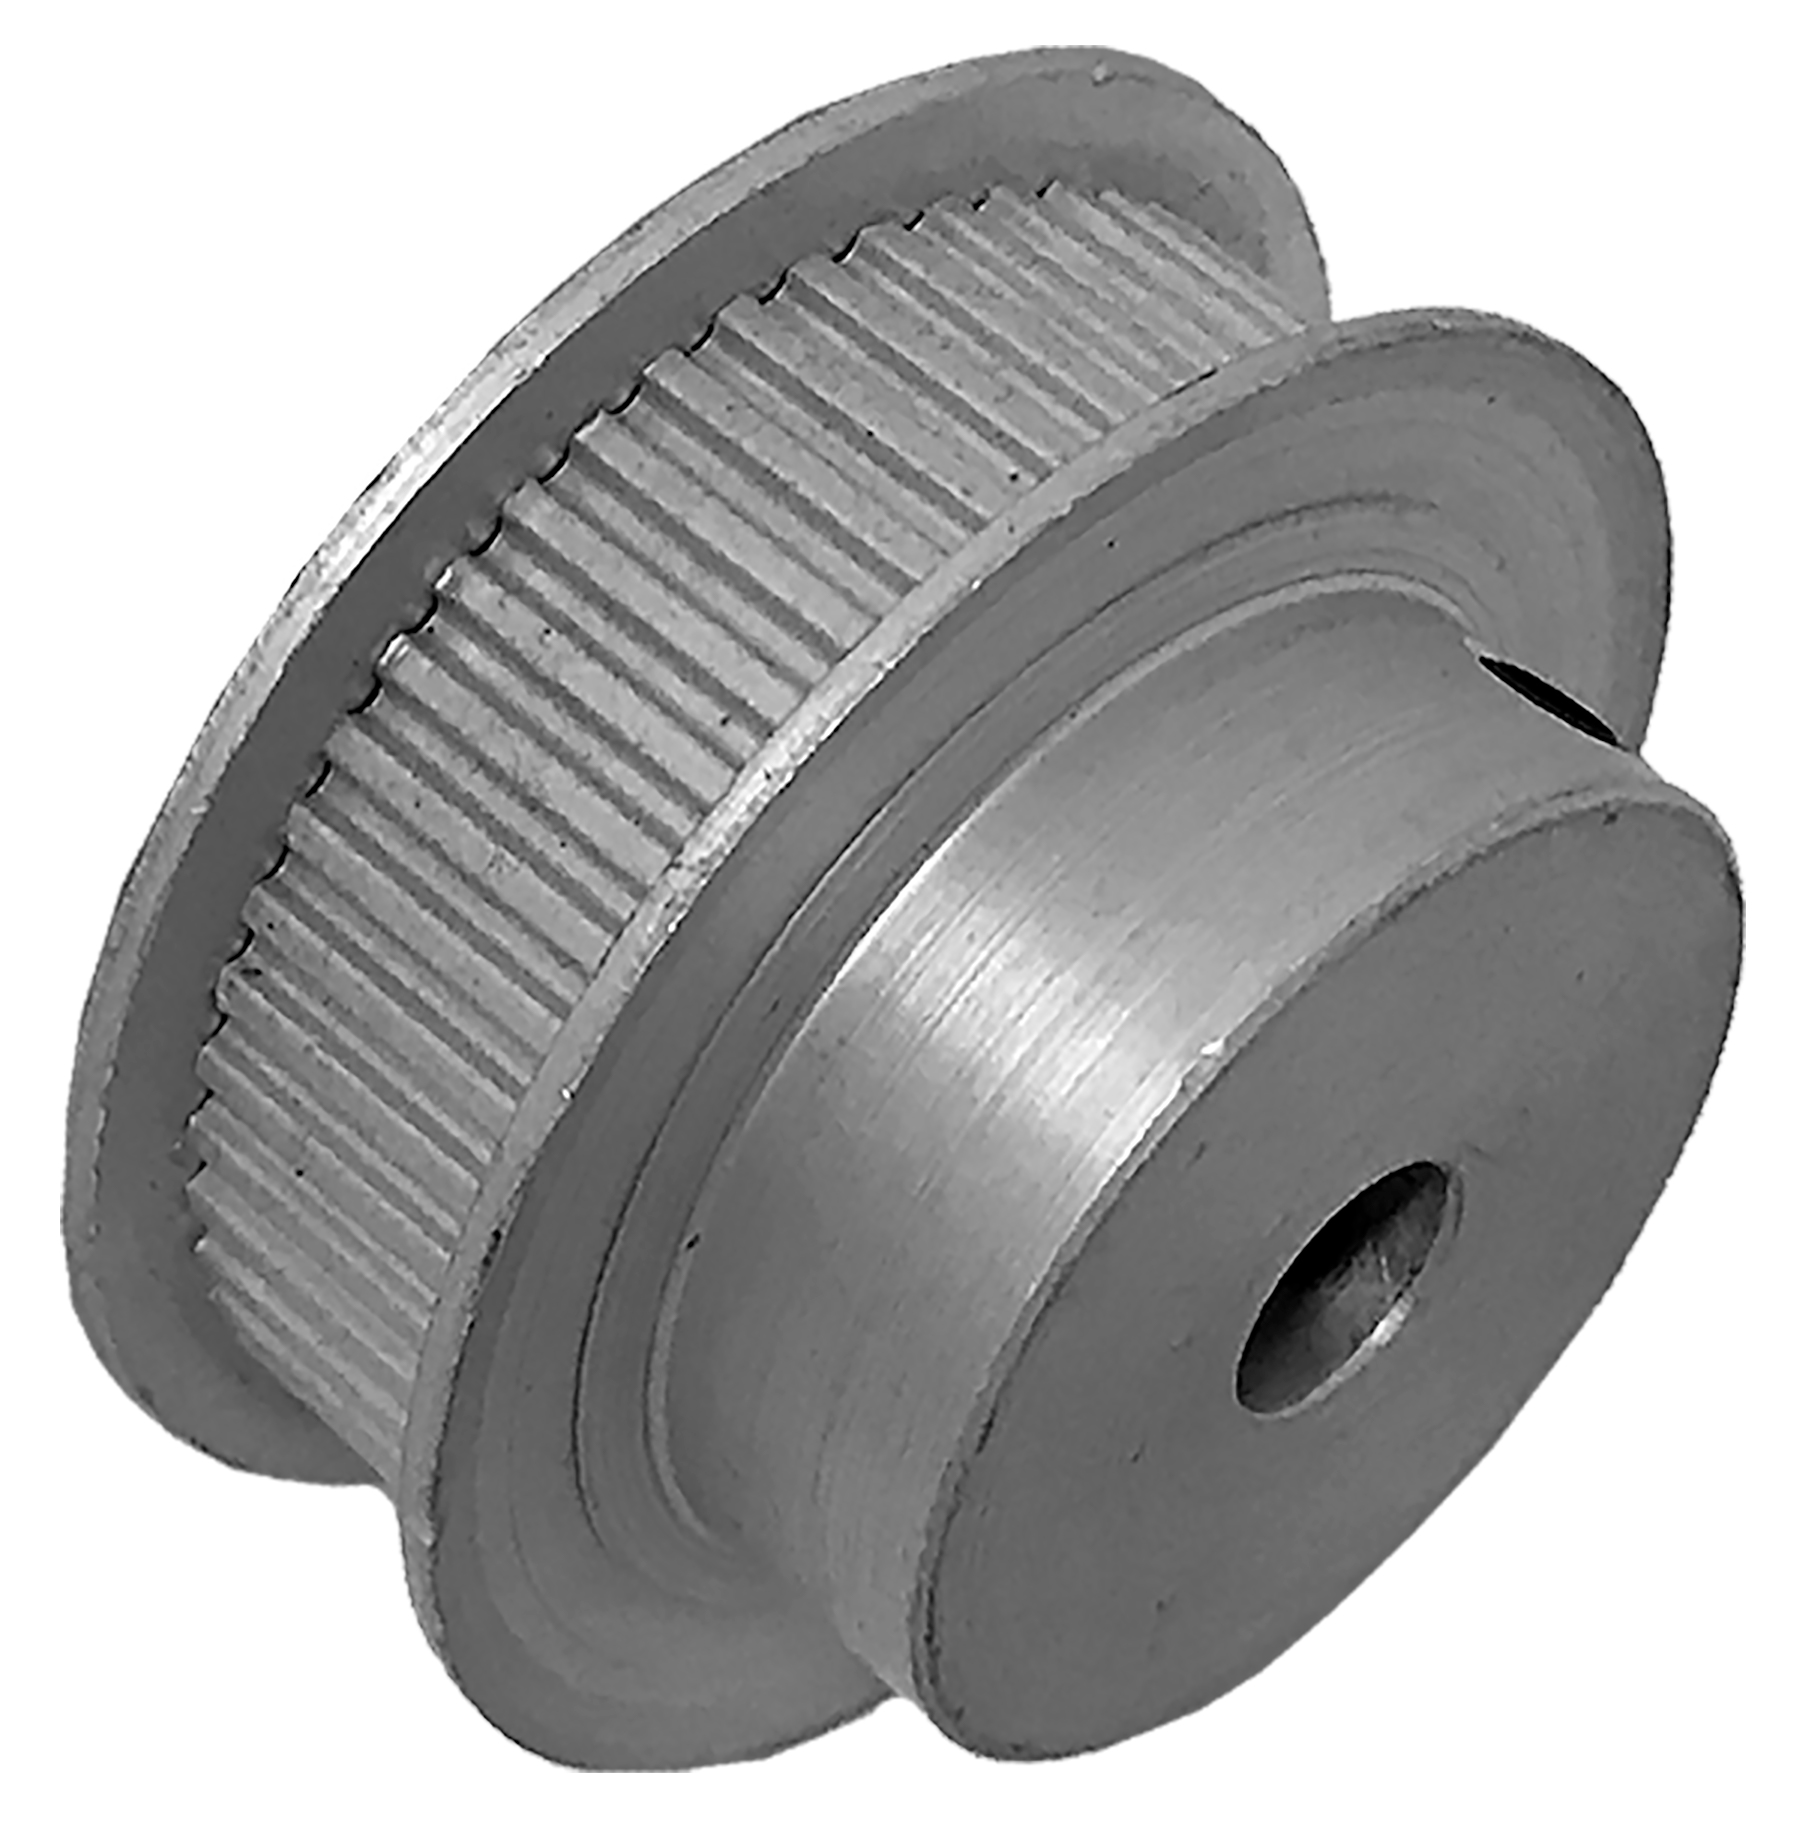 50LT312-6FA3 - Aluminum Imperial Pitch Pulleys